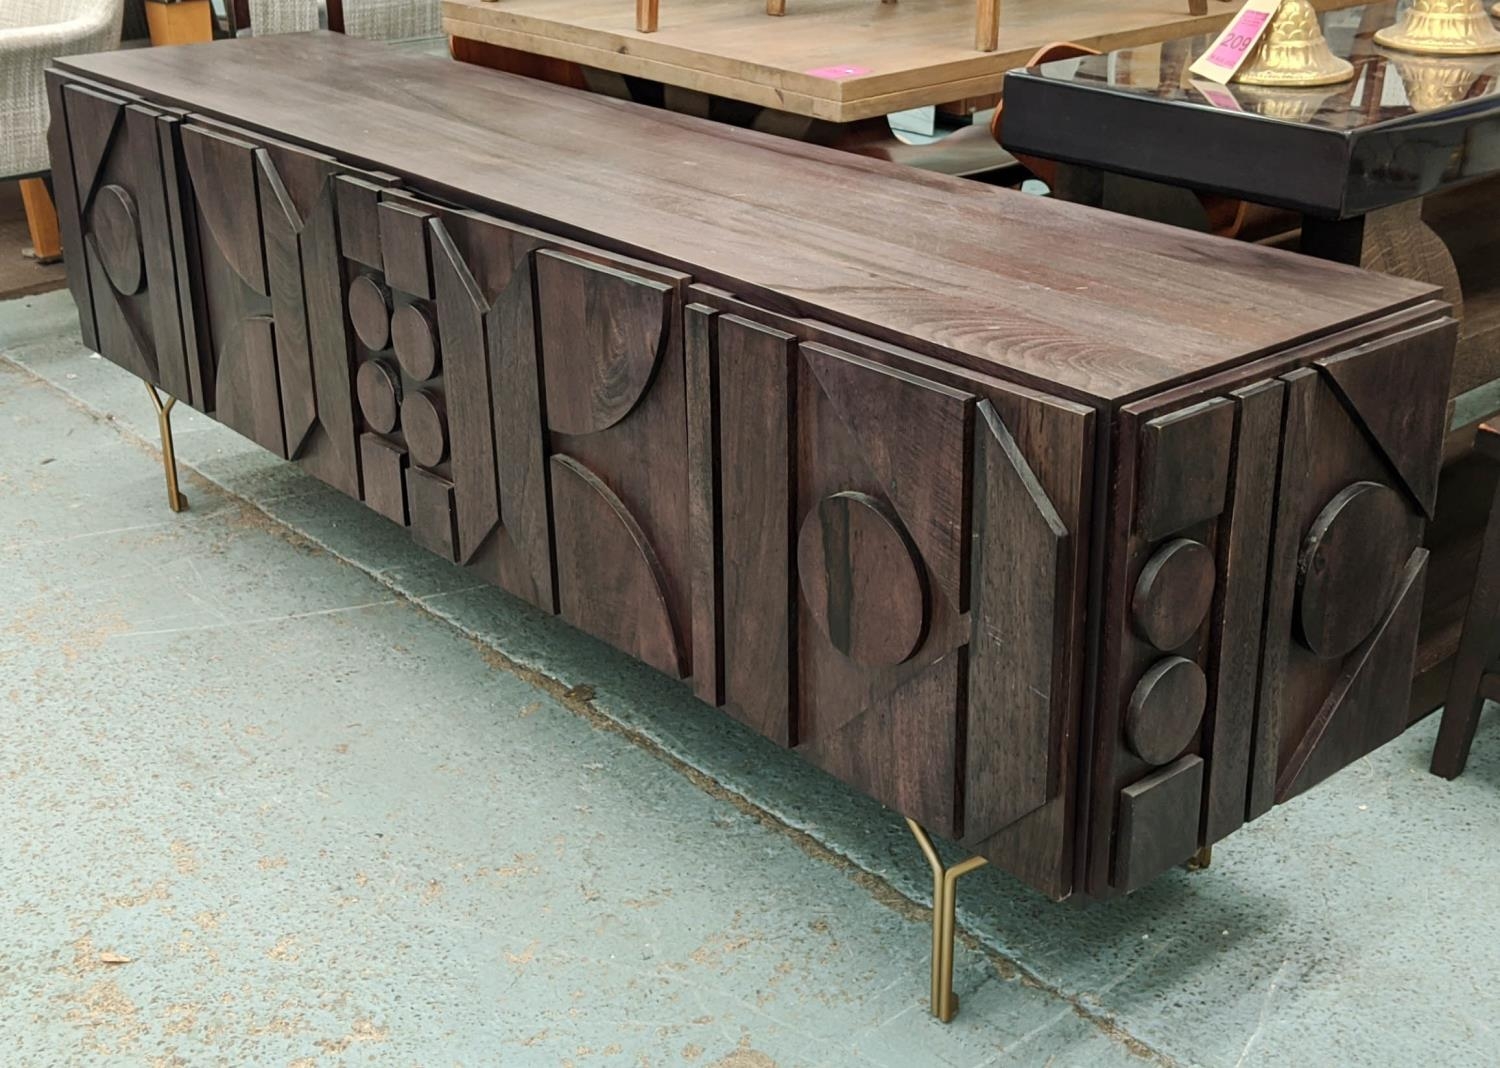 SIDEBOARD, 213cm L x 69cm H x 49cm D with four panelled doors on metal supports. - Image 2 of 6